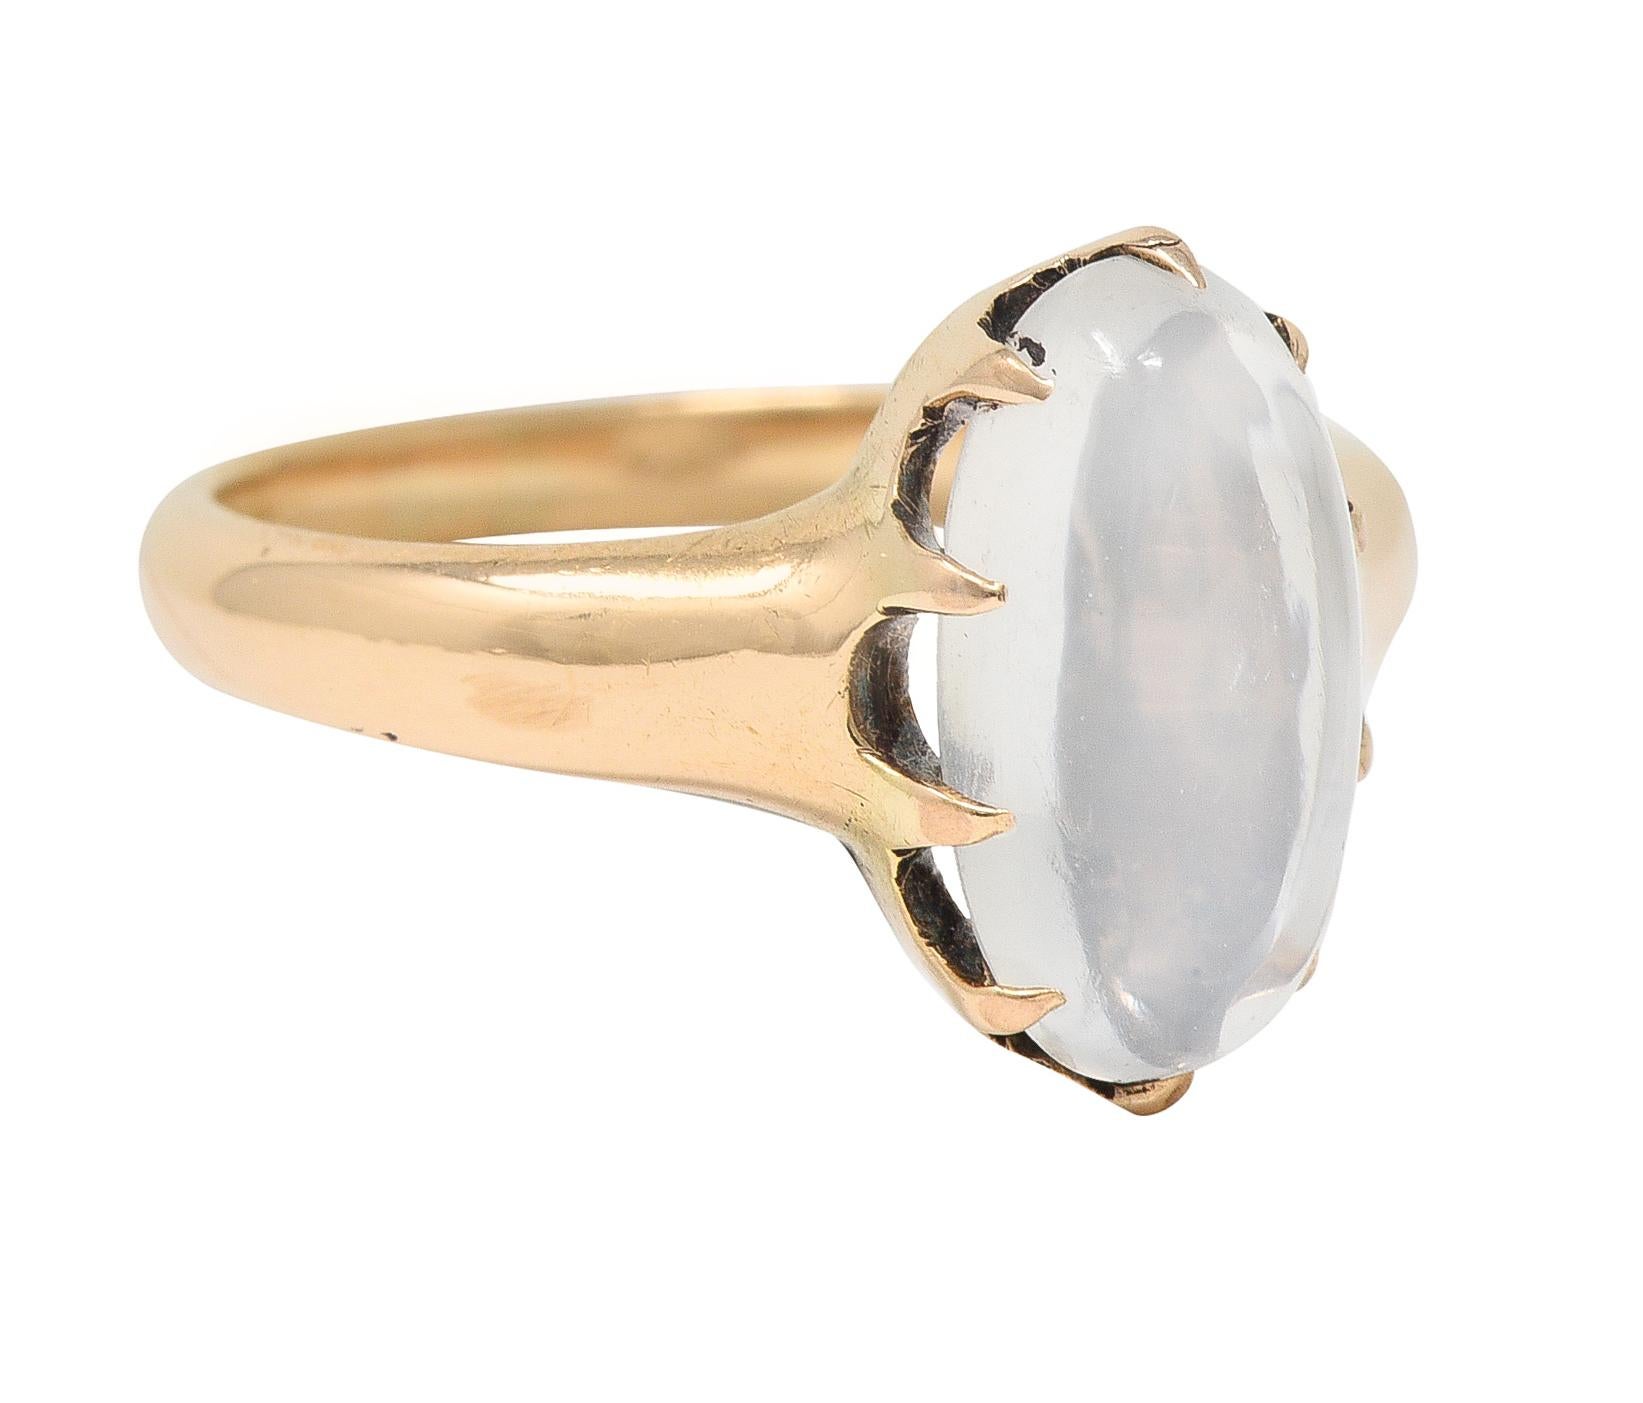 Centering an oval-shaped moonstone cabochon measuring 6.0 x 12.0 mm 
Translucent colorless body with white adularescence 
Set with belcher-style prongs 
With high polish finish
Stamped for 14 karat gold
Circa: 1880s
Ring size: 4 3/4 and